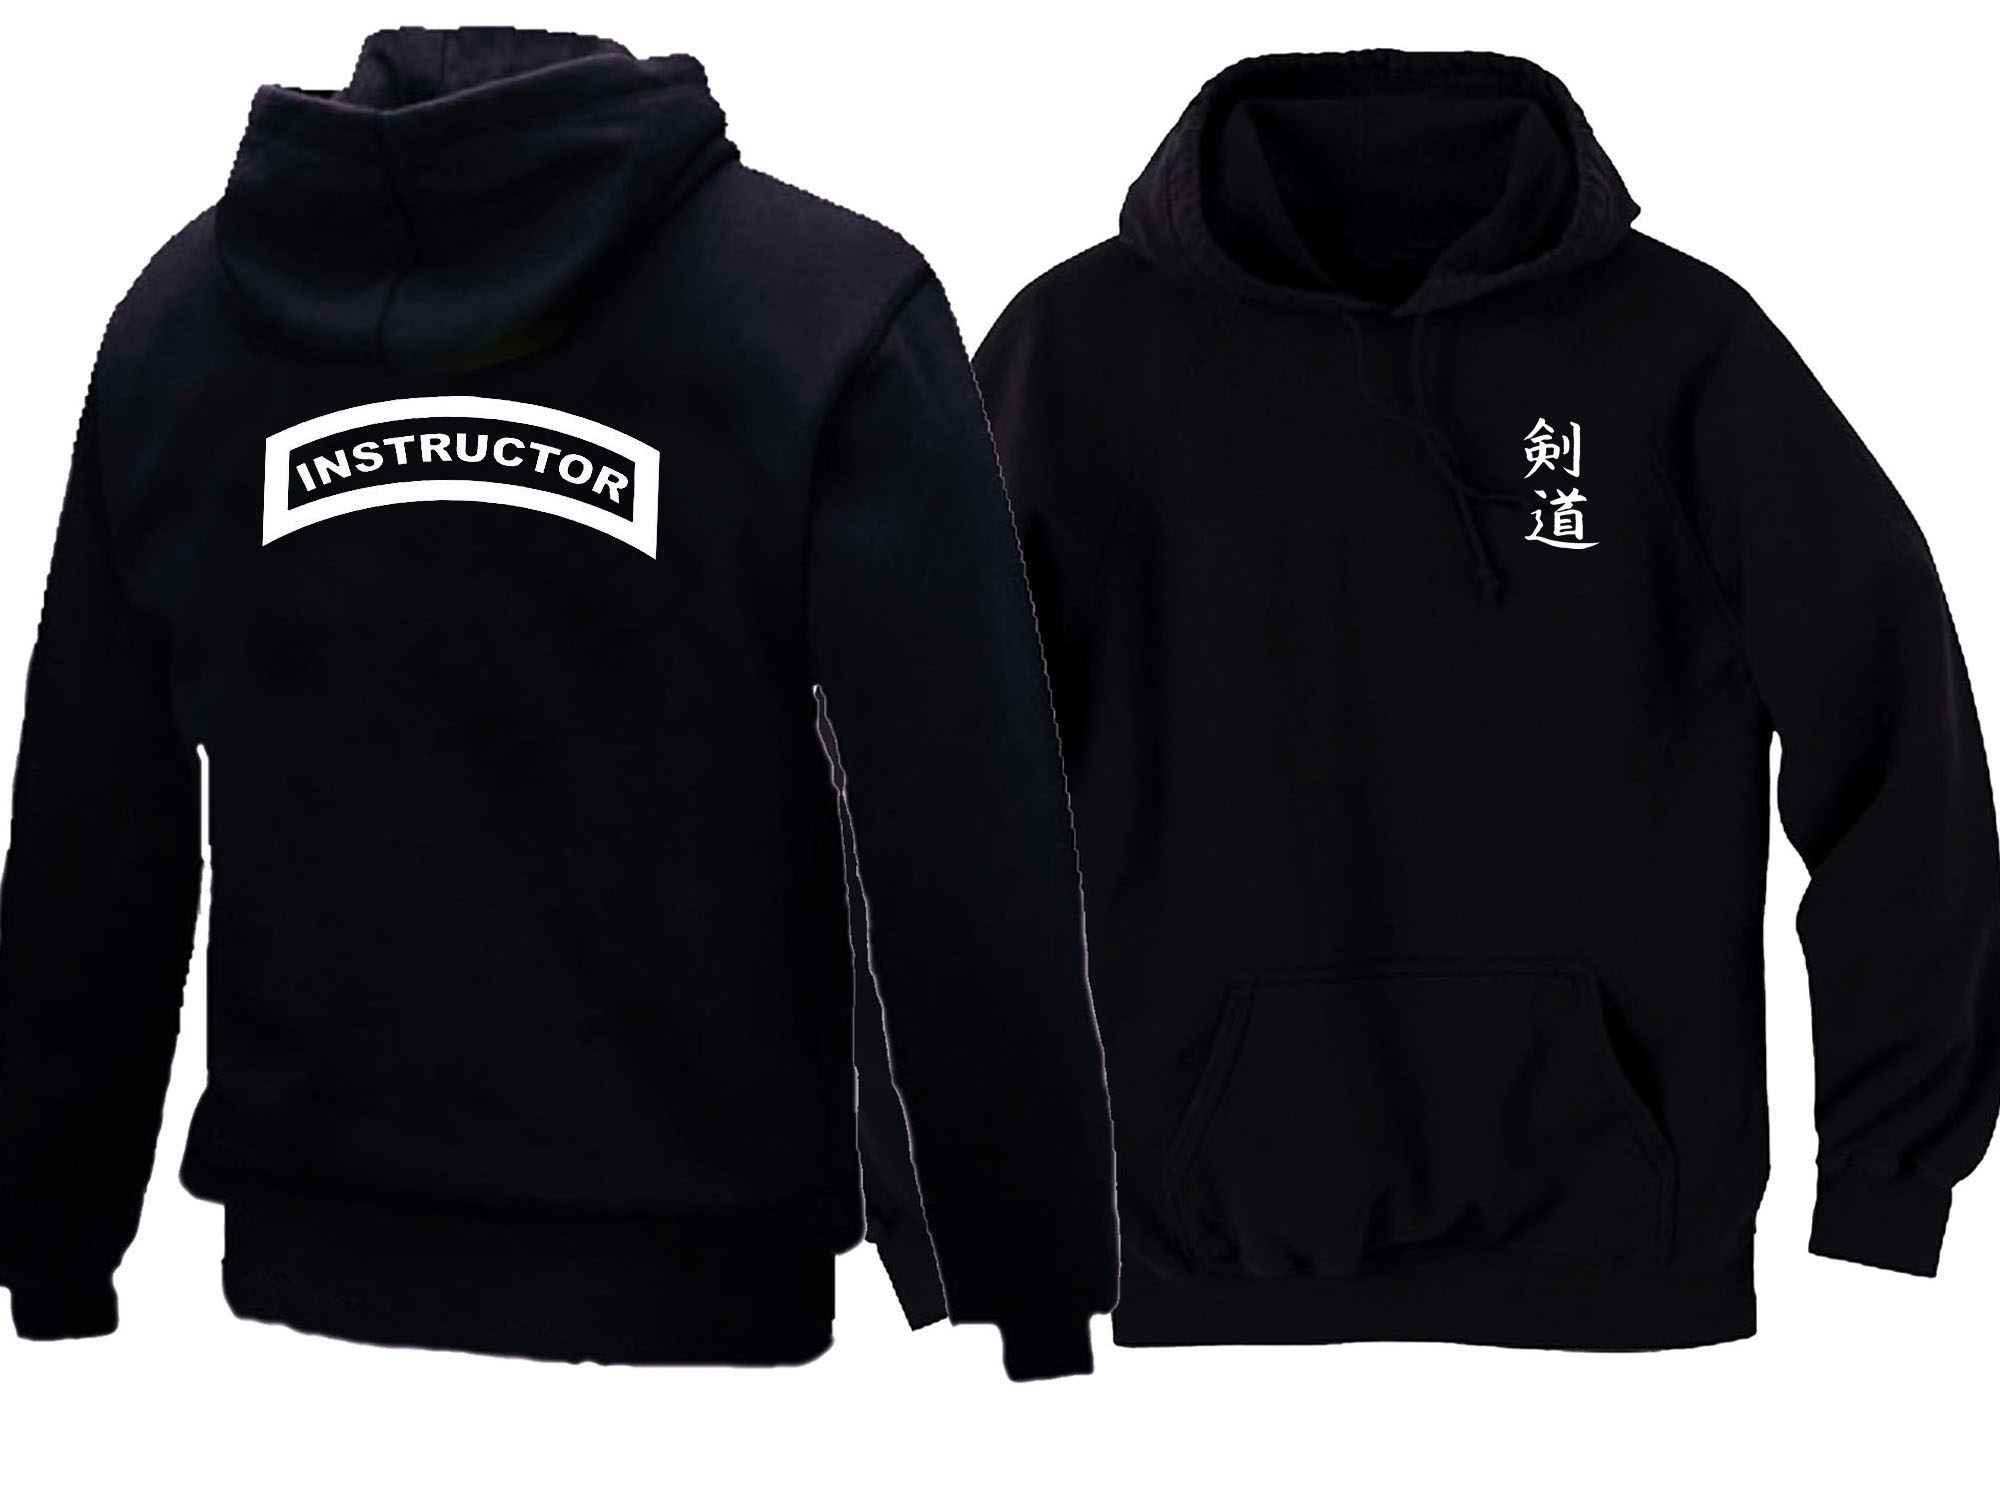 Kendo instructor MMA black hoodie for man/women or youth